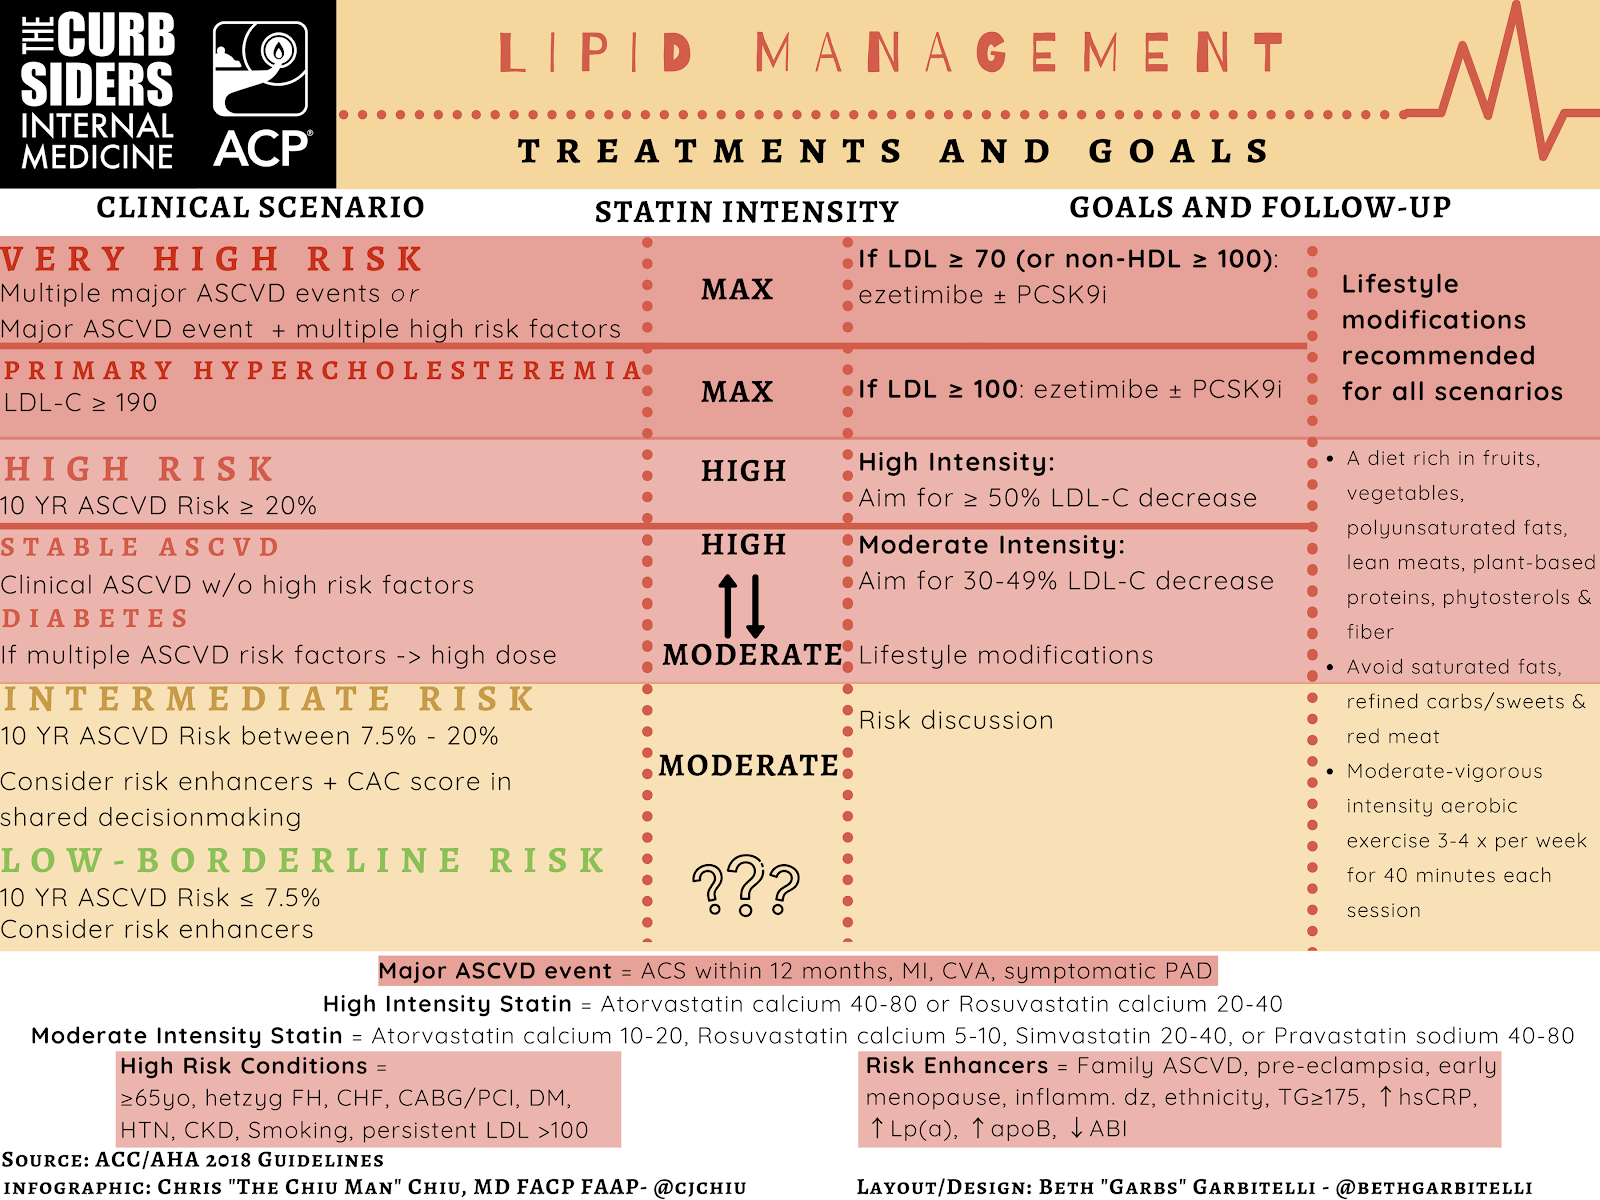 ASCVD Risk Rubric (based on 2018 guideline) The Curbsiders #191 Lipids Update with Erin Michos MD. Infographic by Chris Chiu and Beth Garbitelli.